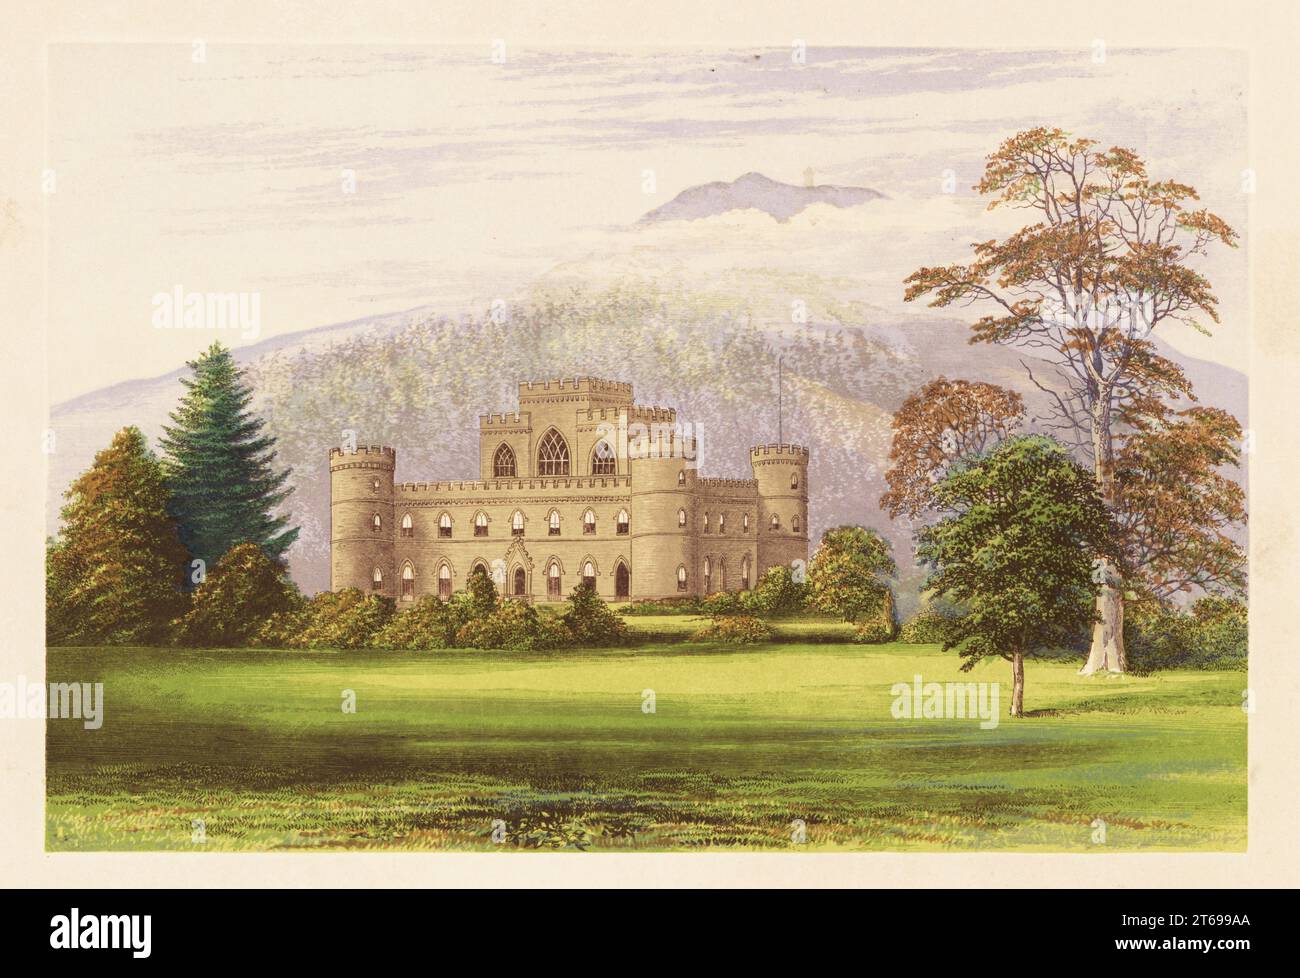 Inverary Castle, Argyll, Scotland. Gothic Revival-style castle with crenellated walls and circular towers built in 1743 by William Adam and Roger Morris, with neo-classical rooms by Robert Mylne for John Campbell, 5th Duke of Argyll. Colour woodblock by Benjamin Fawcett in the Baxter process of an illustration by Alexander Francis Lydon from Reverend Francis Orpen Morriss Picturesque Views of the Seats of Noblemen and Gentlemen of Great Britain and Ireland, William Mackenzie, London, 1880. Stock Photo